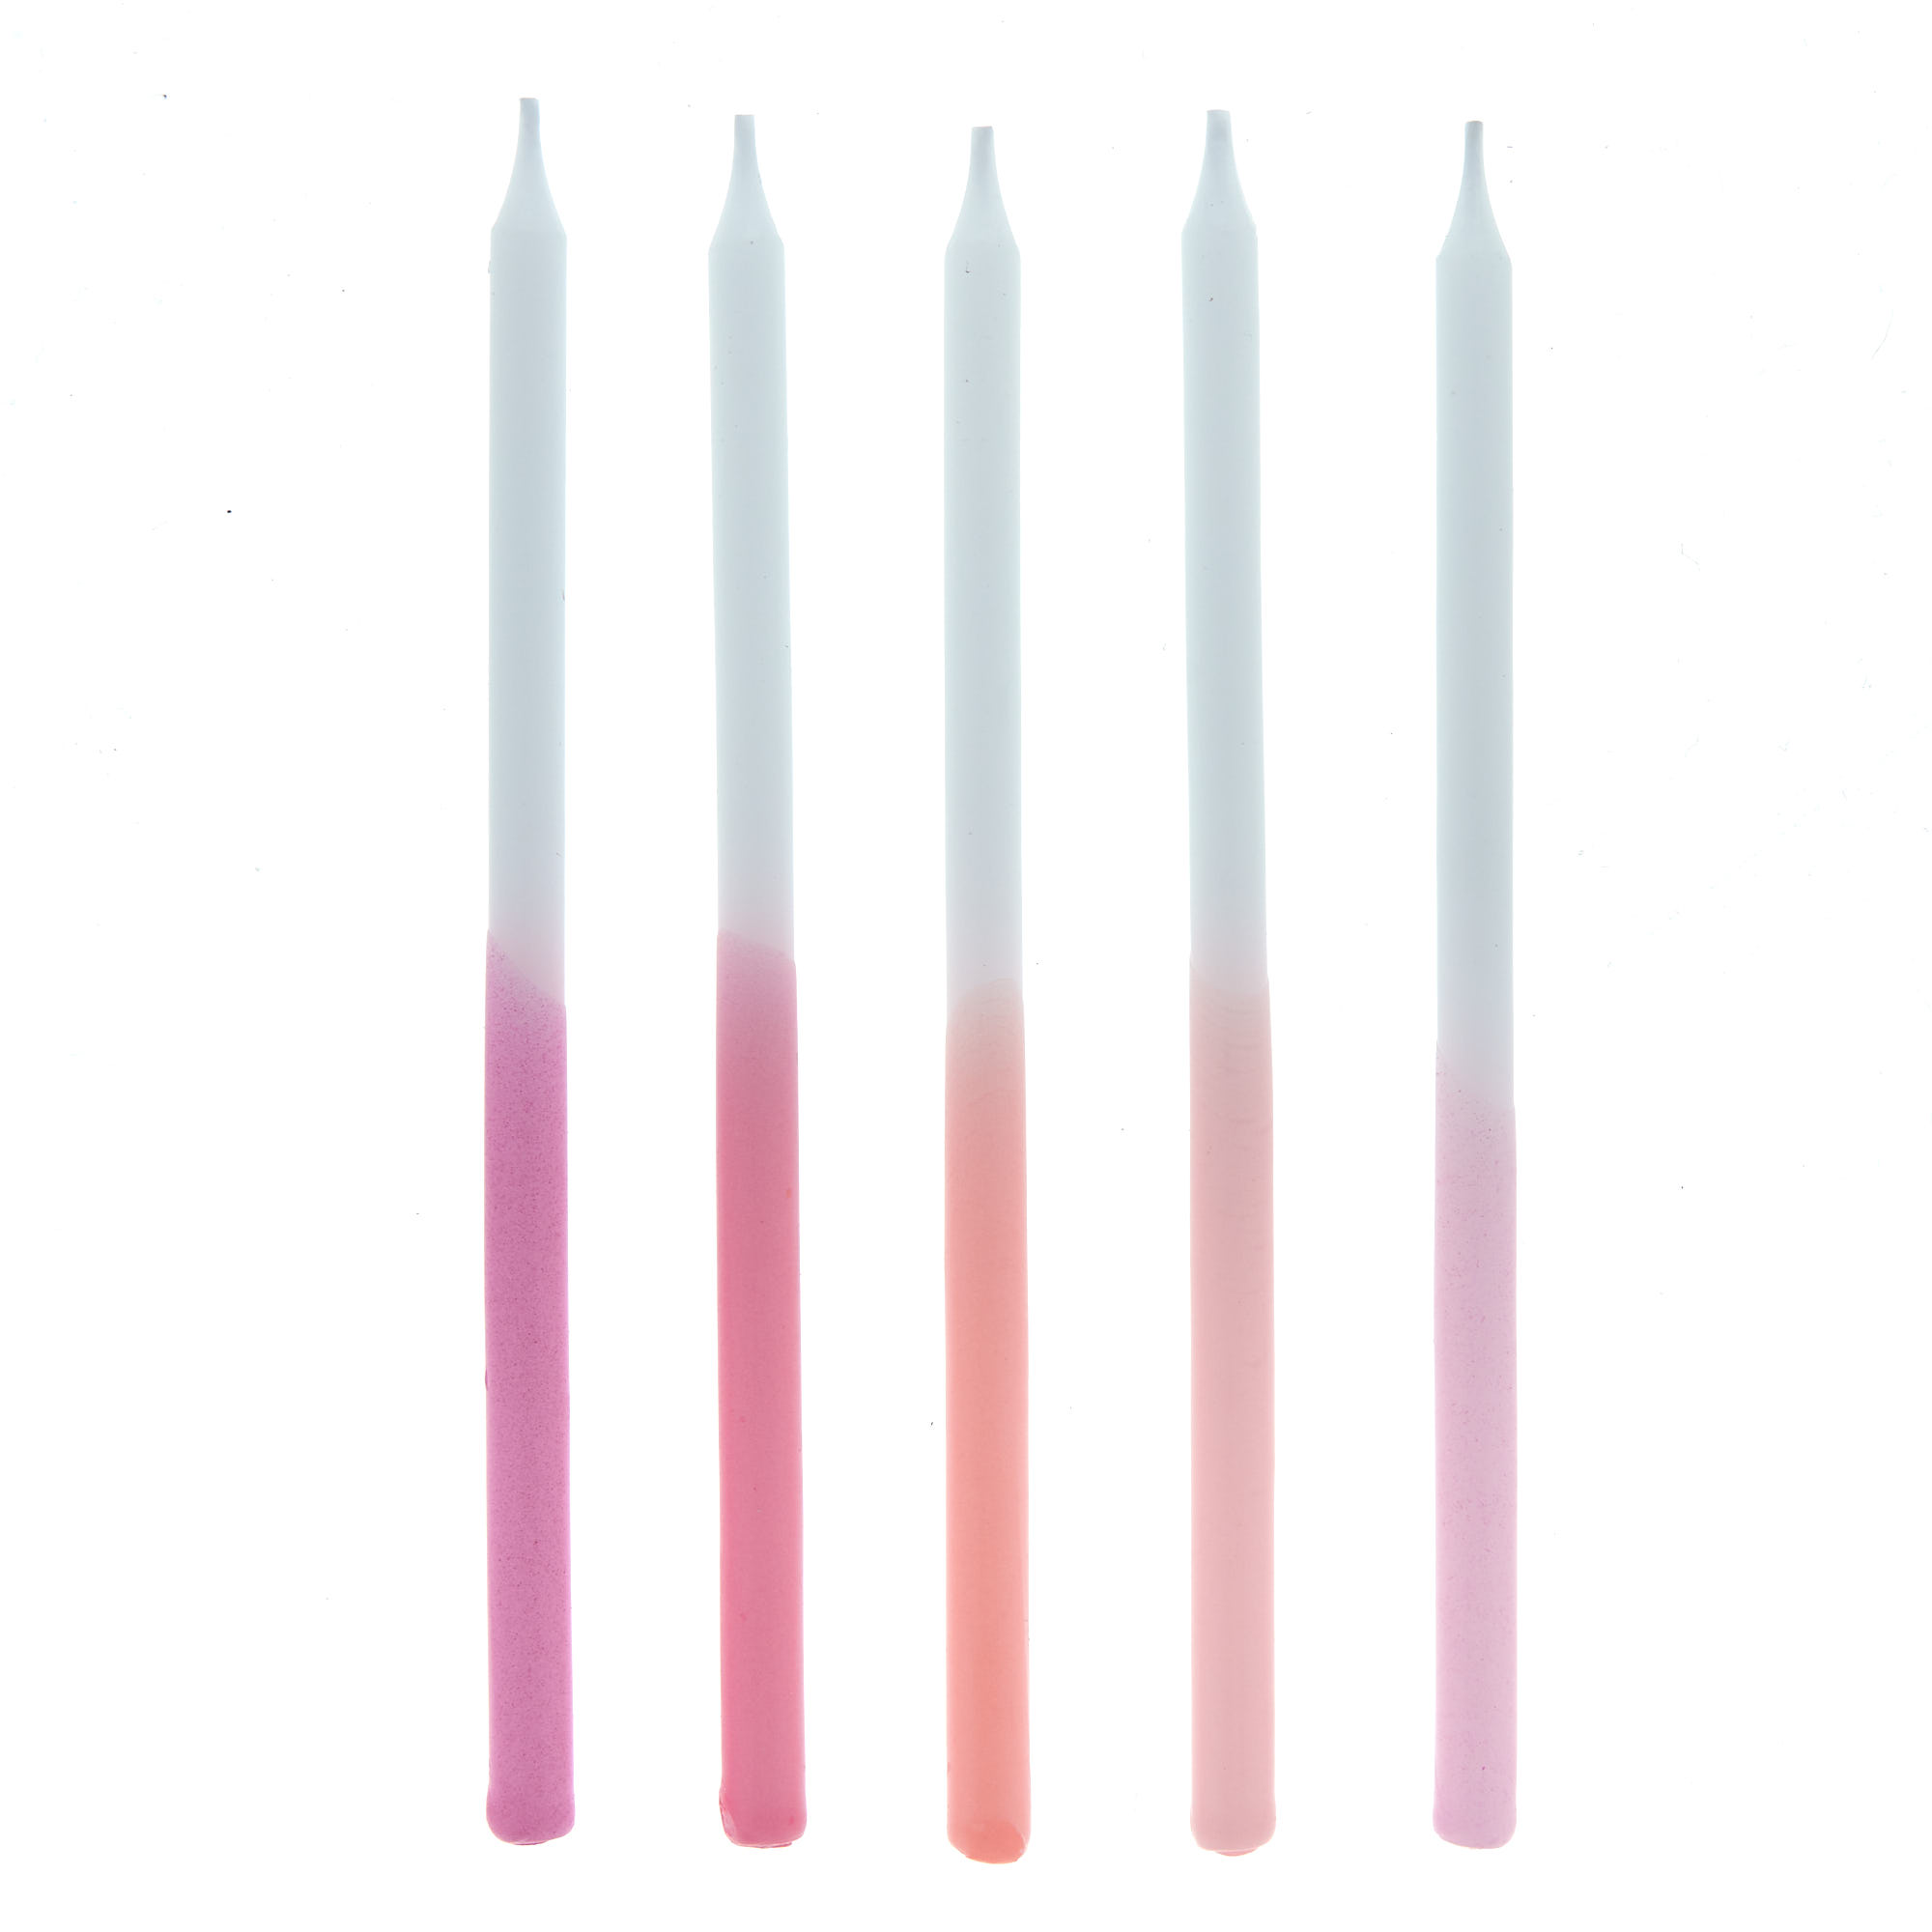 Tall Pink Gradient Cake Candles & Holders - Pack of 10 